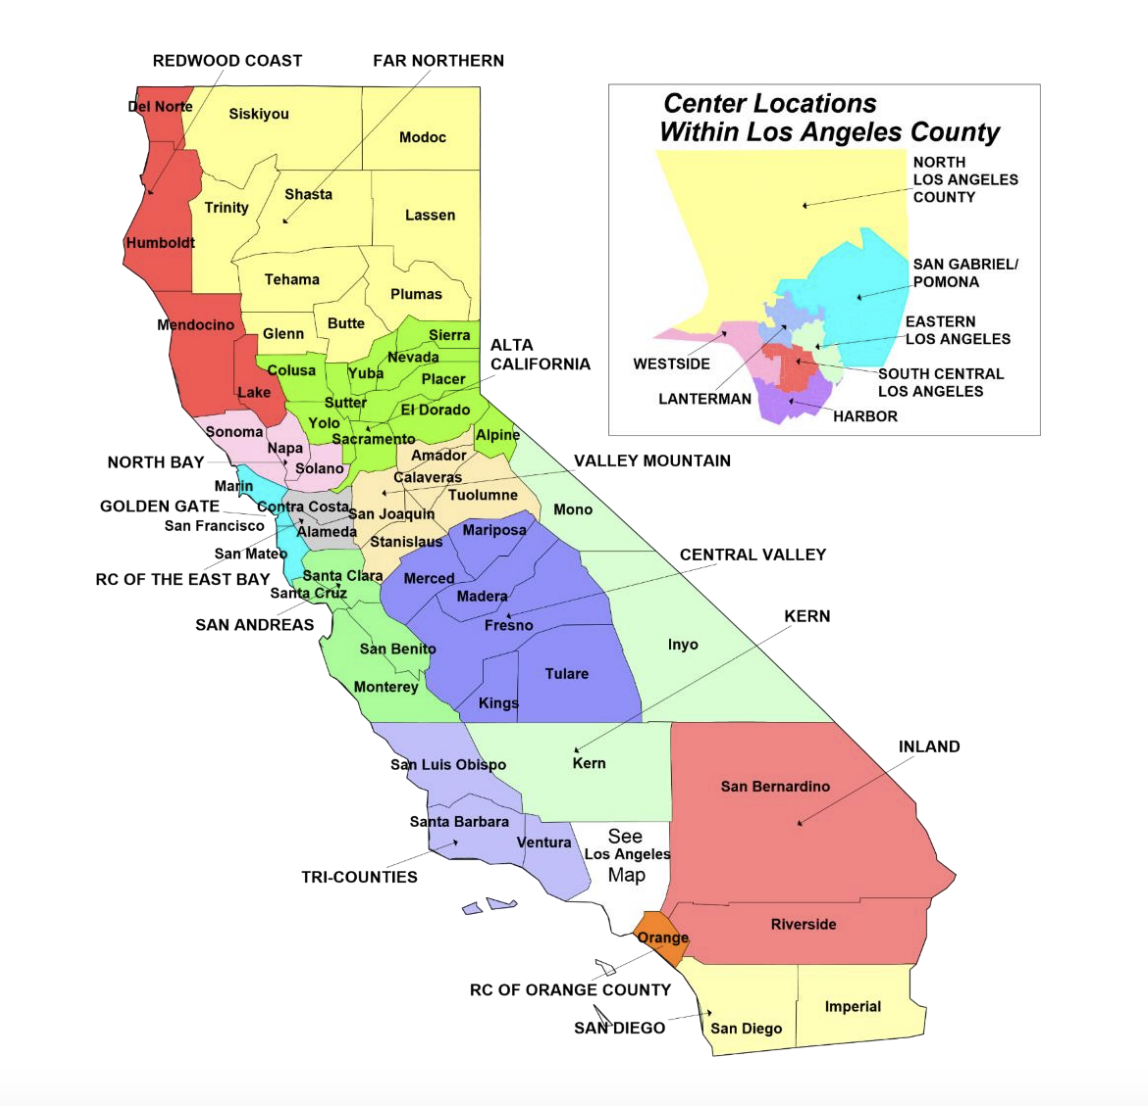 Map of California detailing the catchment areas of the 21 regional centers. There is also an expanded map of the regional centers in Los Angeles County